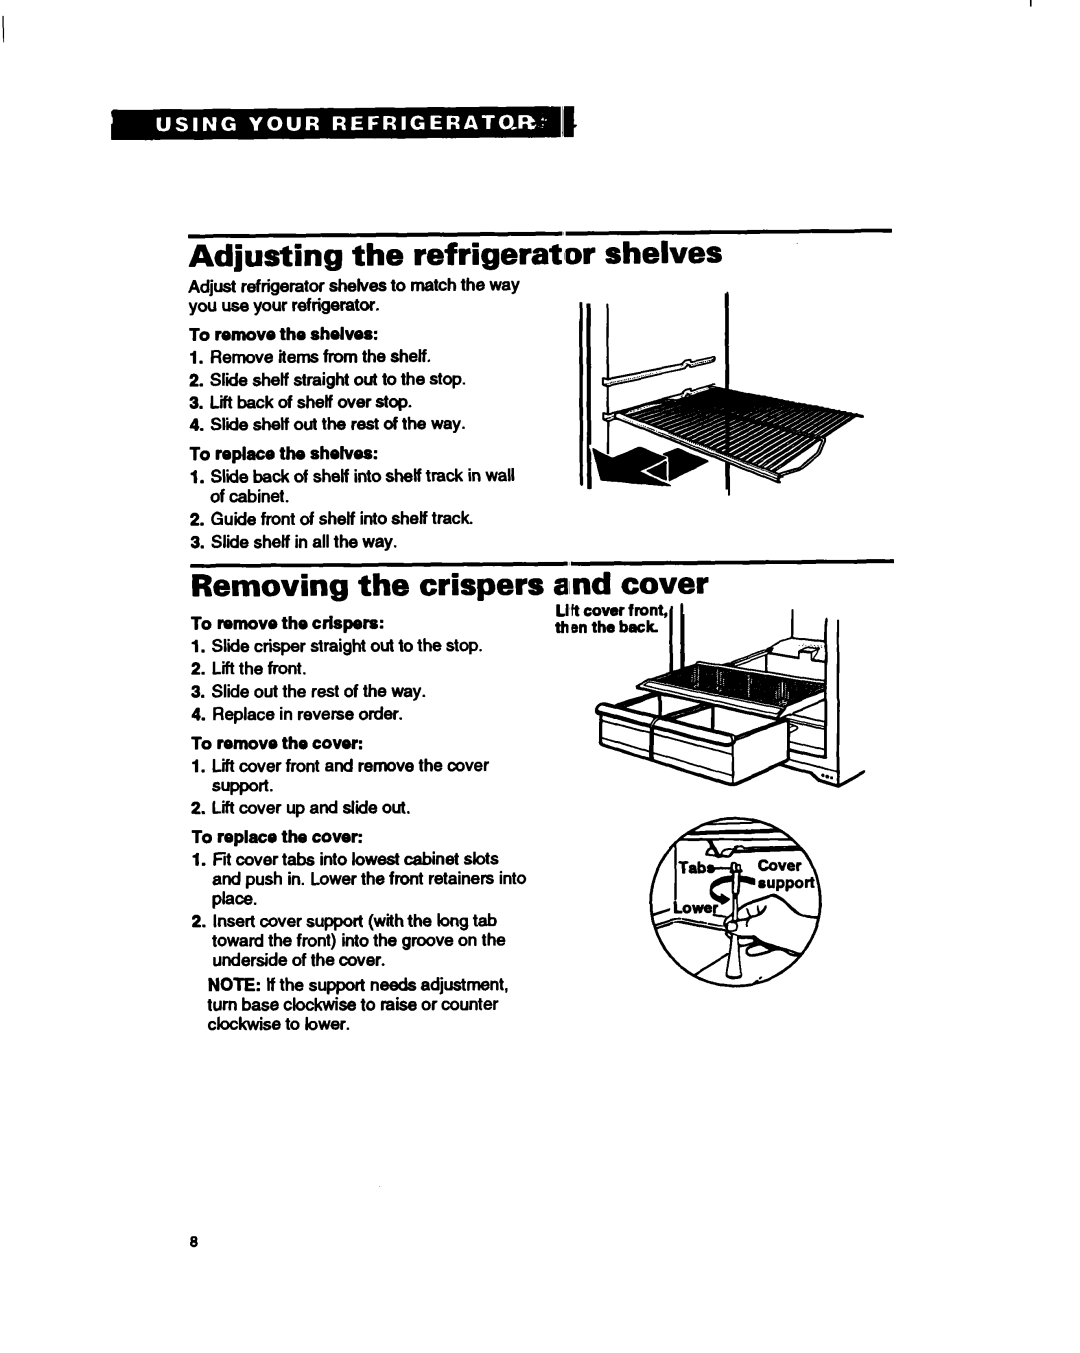 Whirlpool RTl4GD, RT14HK important safety instructions Adjusting the refrigeratlor shelves, Removing the crispers alnd cover 